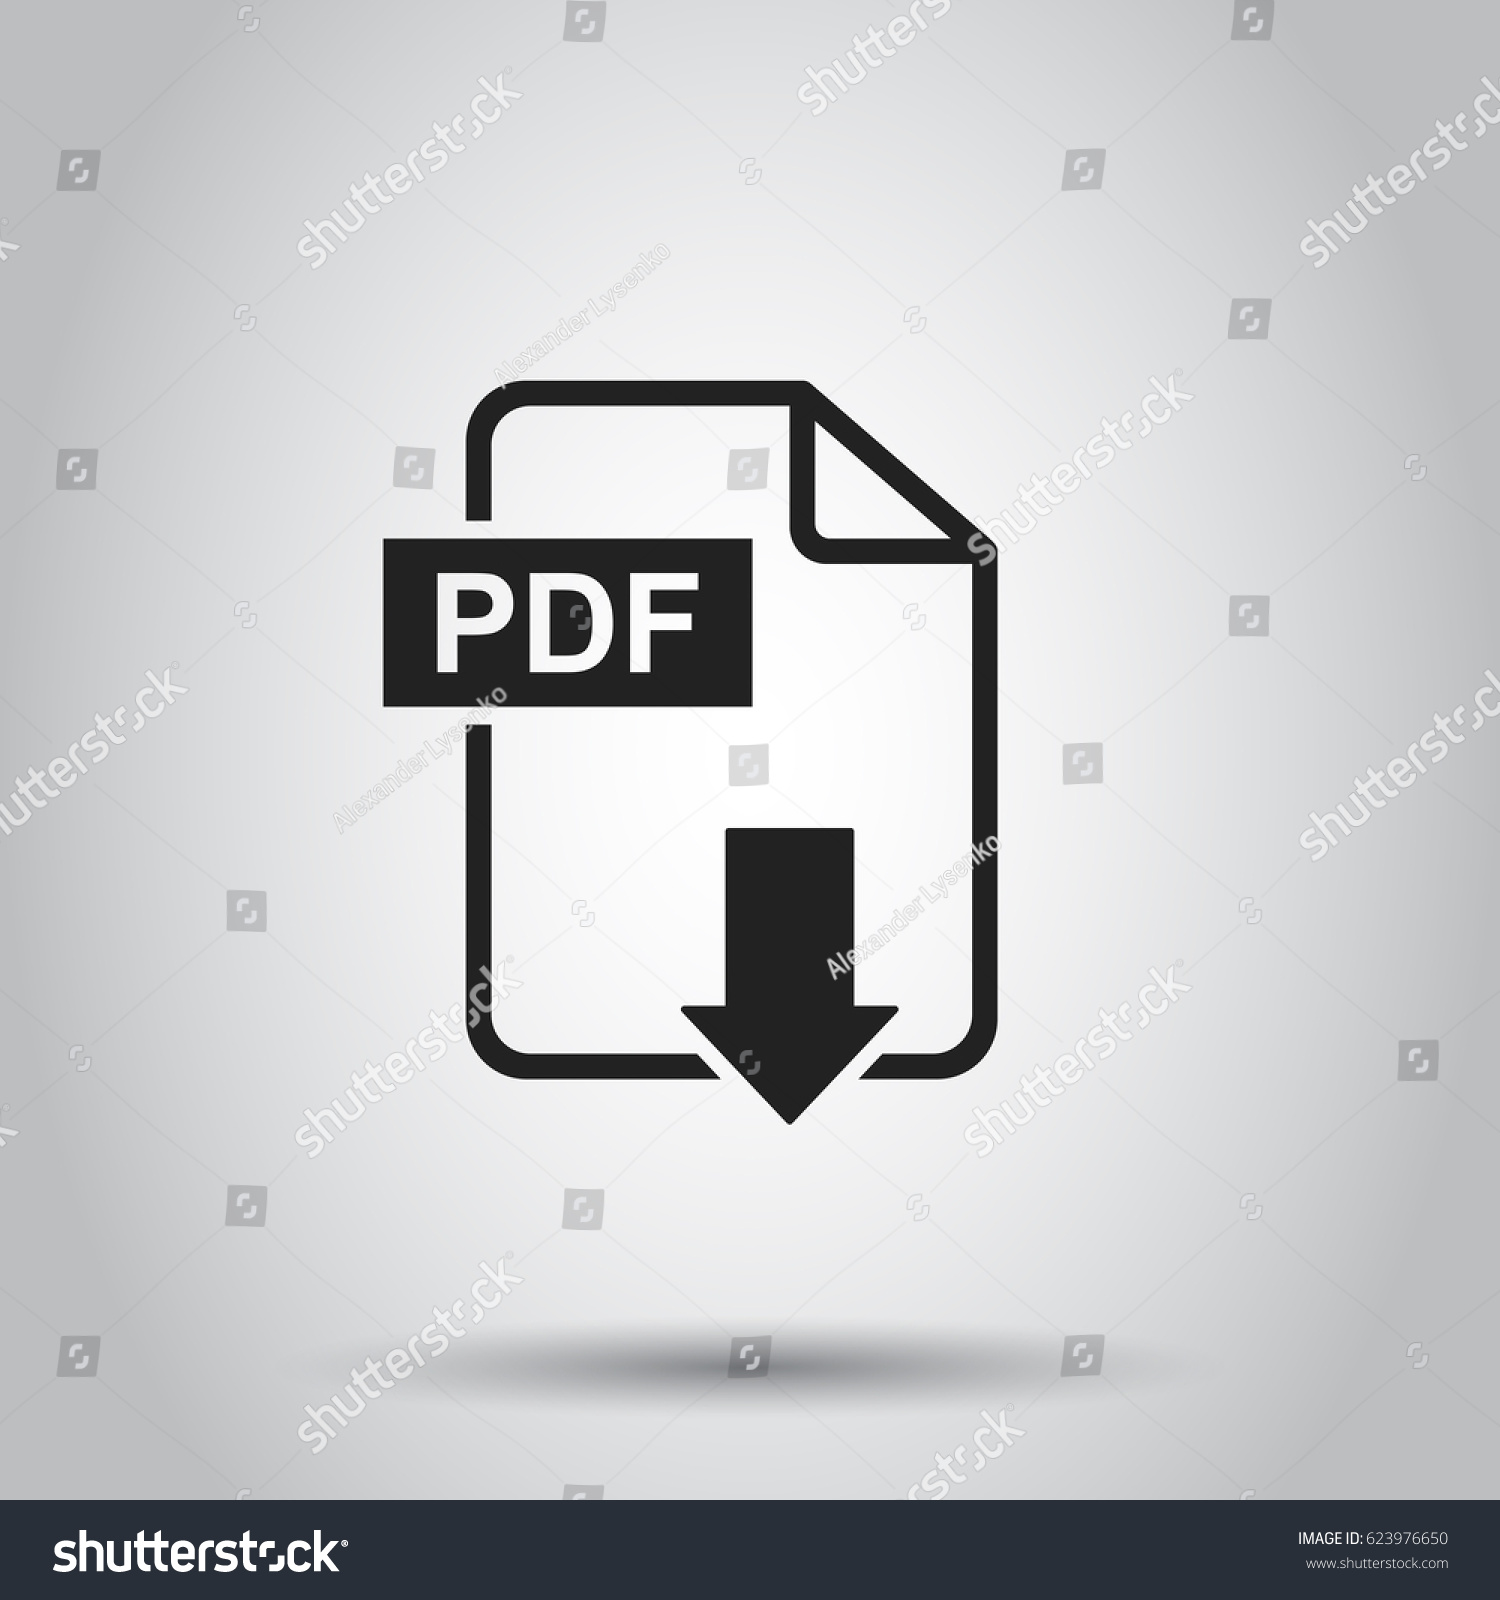 File Formats - Your Logo File